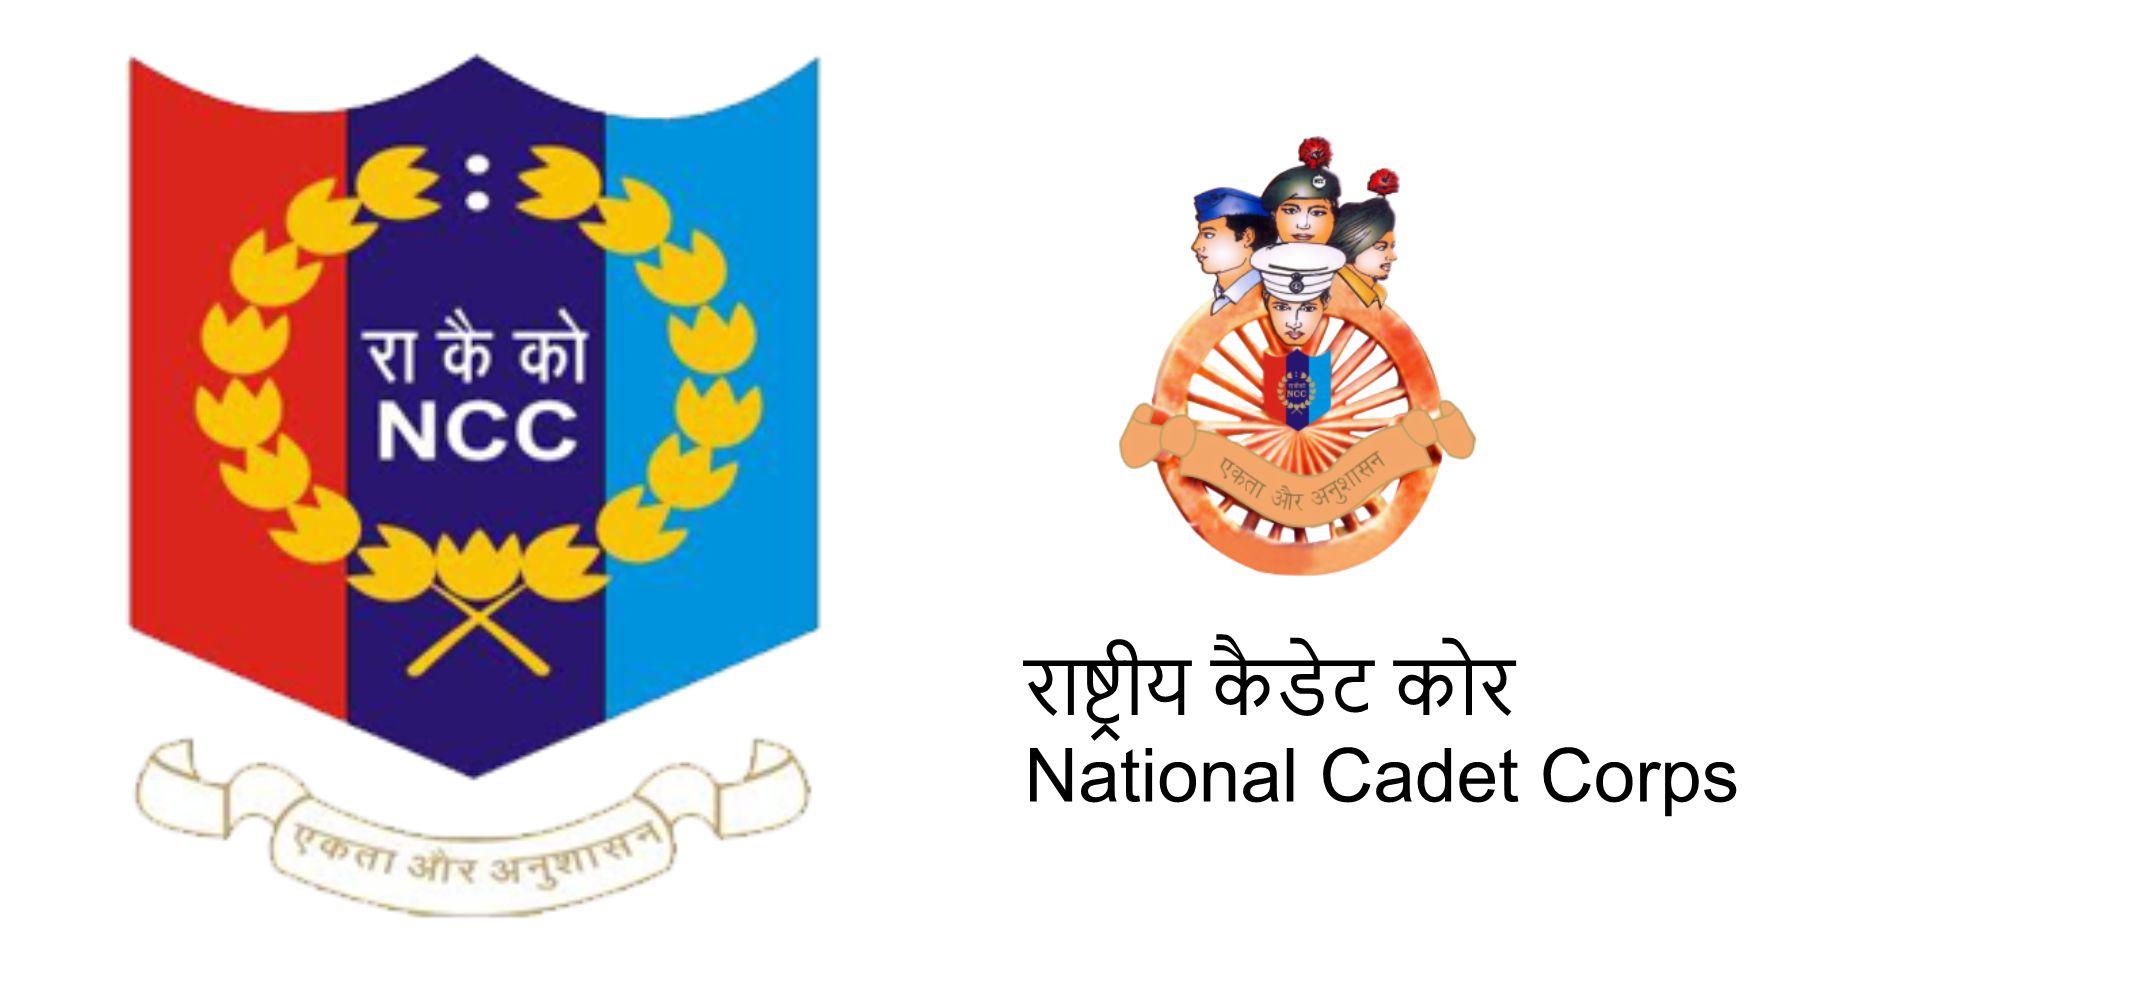 How to join ncc national cadet corps - YouTube